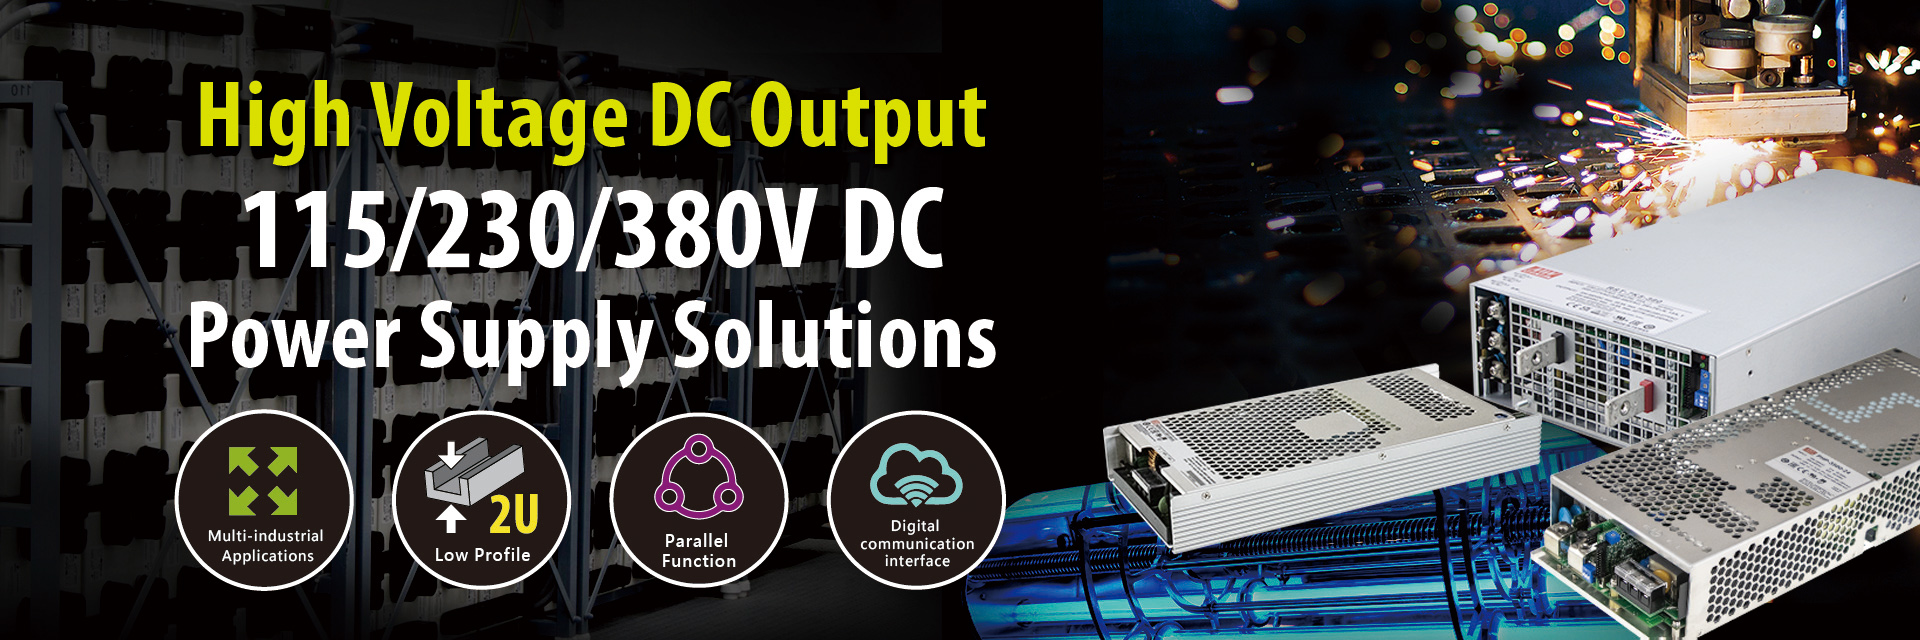 MEAN WELL High Voltage DC (HVDC) Output 115/230/380V DC Power Supply Solutions